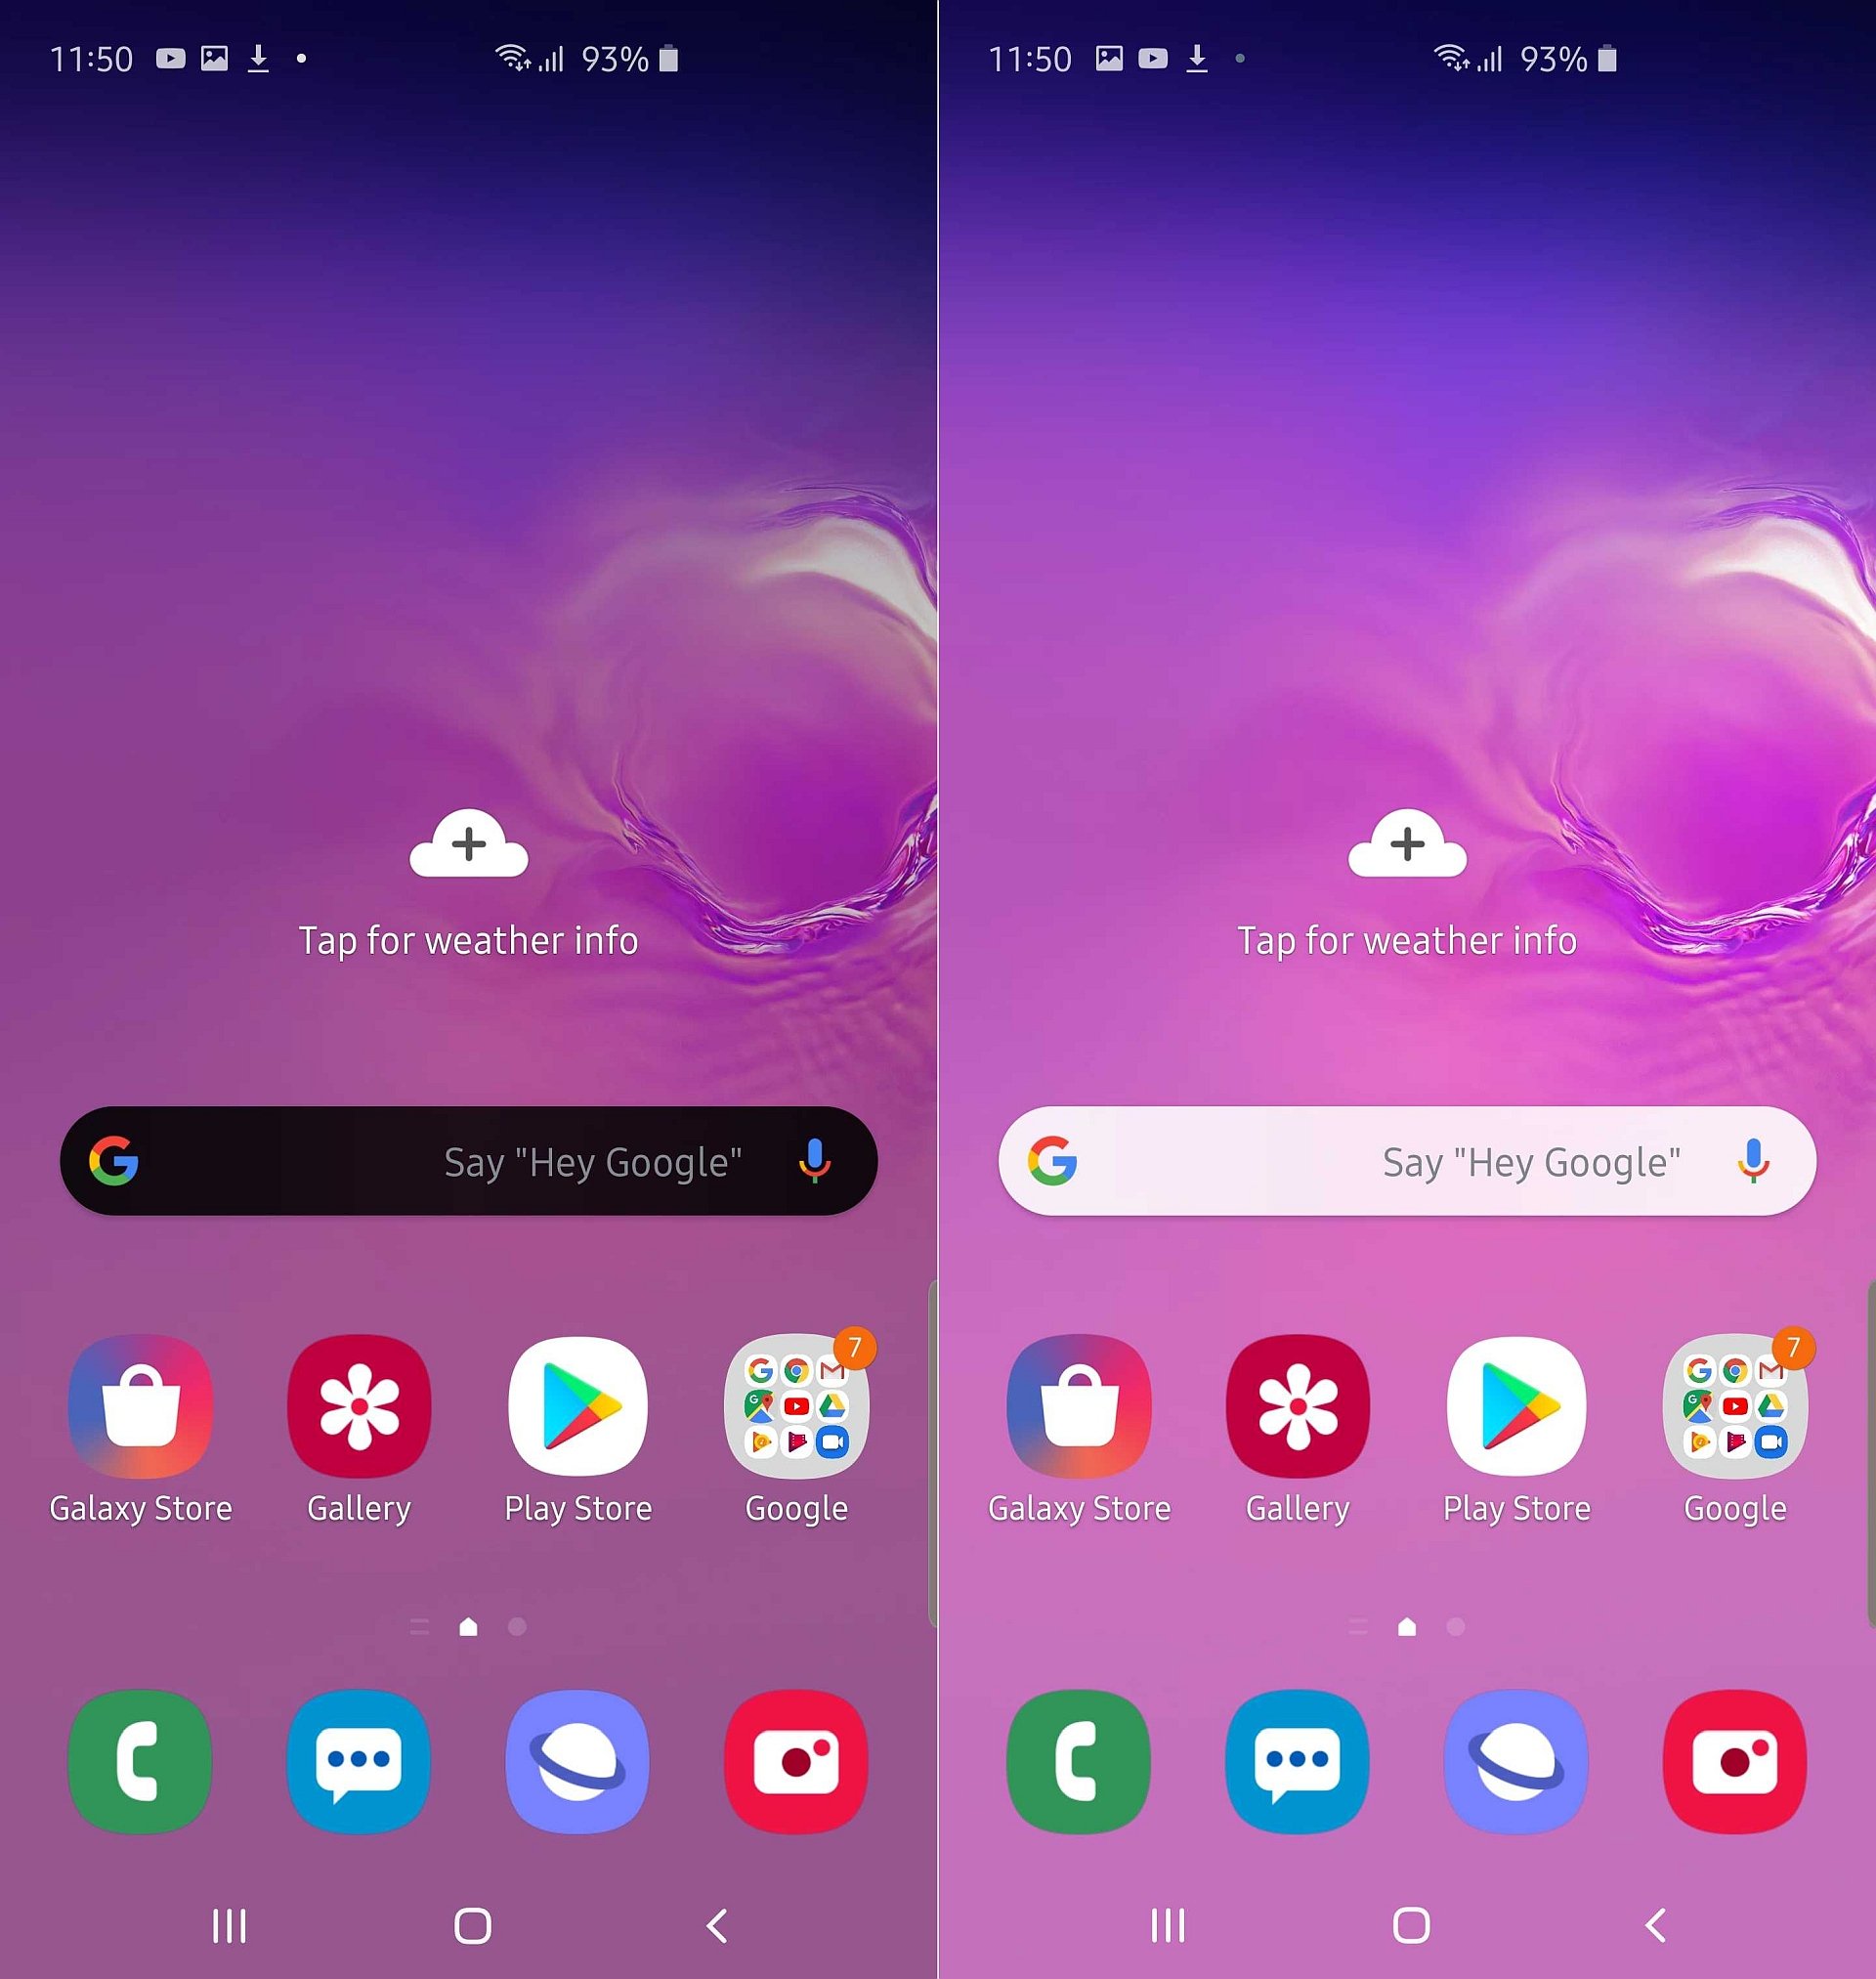 Solved: One UI 3 wallpapers - Samsung Members